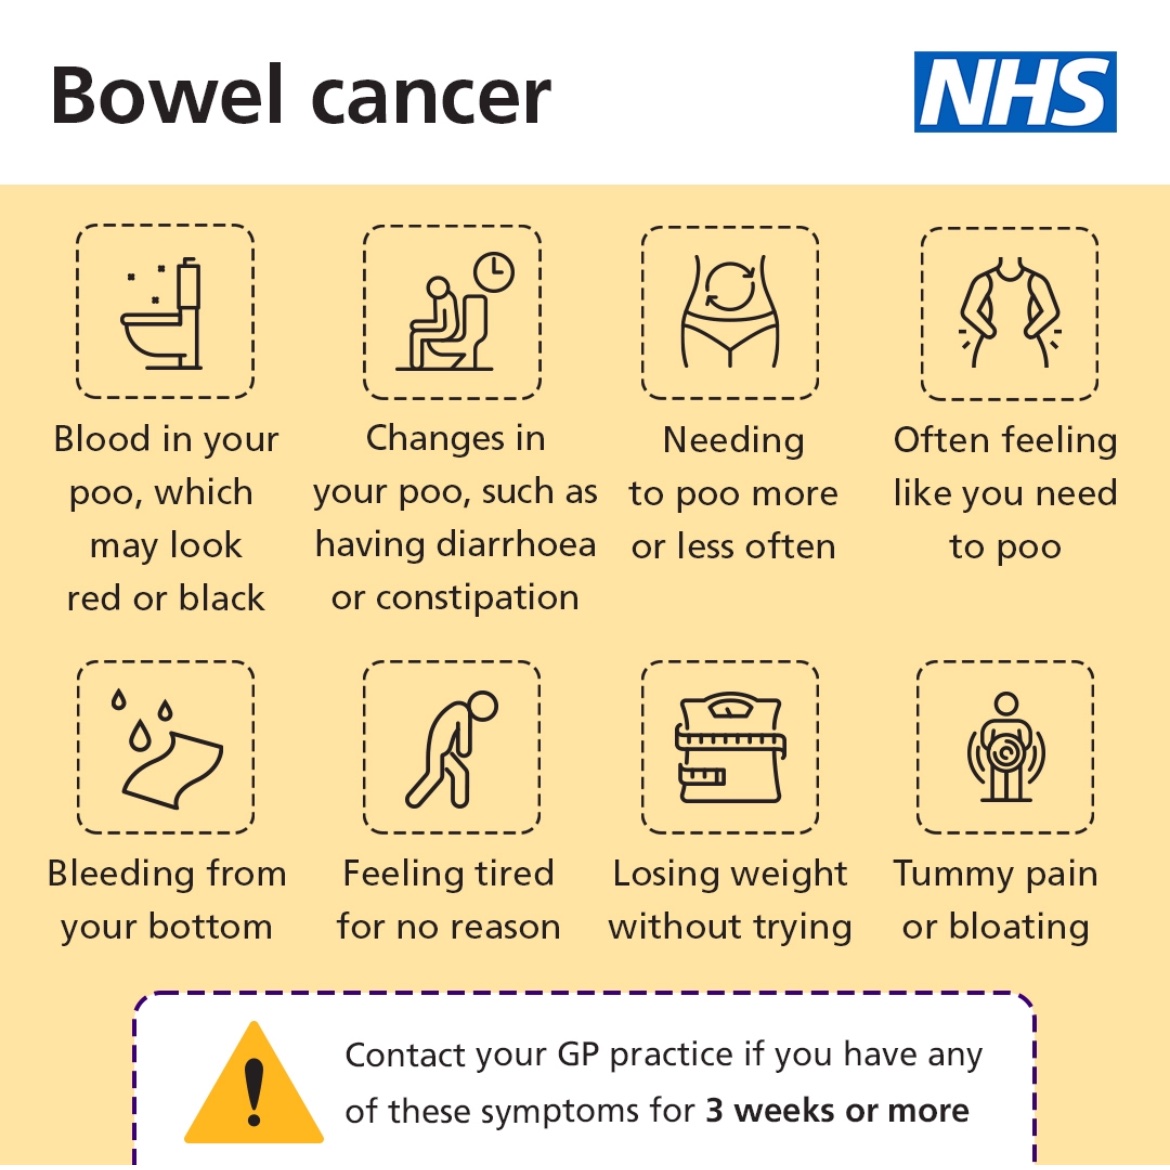 April is #BowelCancerAwarenessMonth. Bowel cancer is the fourth most common cancer in the UK. Here are the main symptoms. Other health problems can cause similar symptoms - but it's important to get them checked by a GP if you have any symptoms for 3 weeks or more.